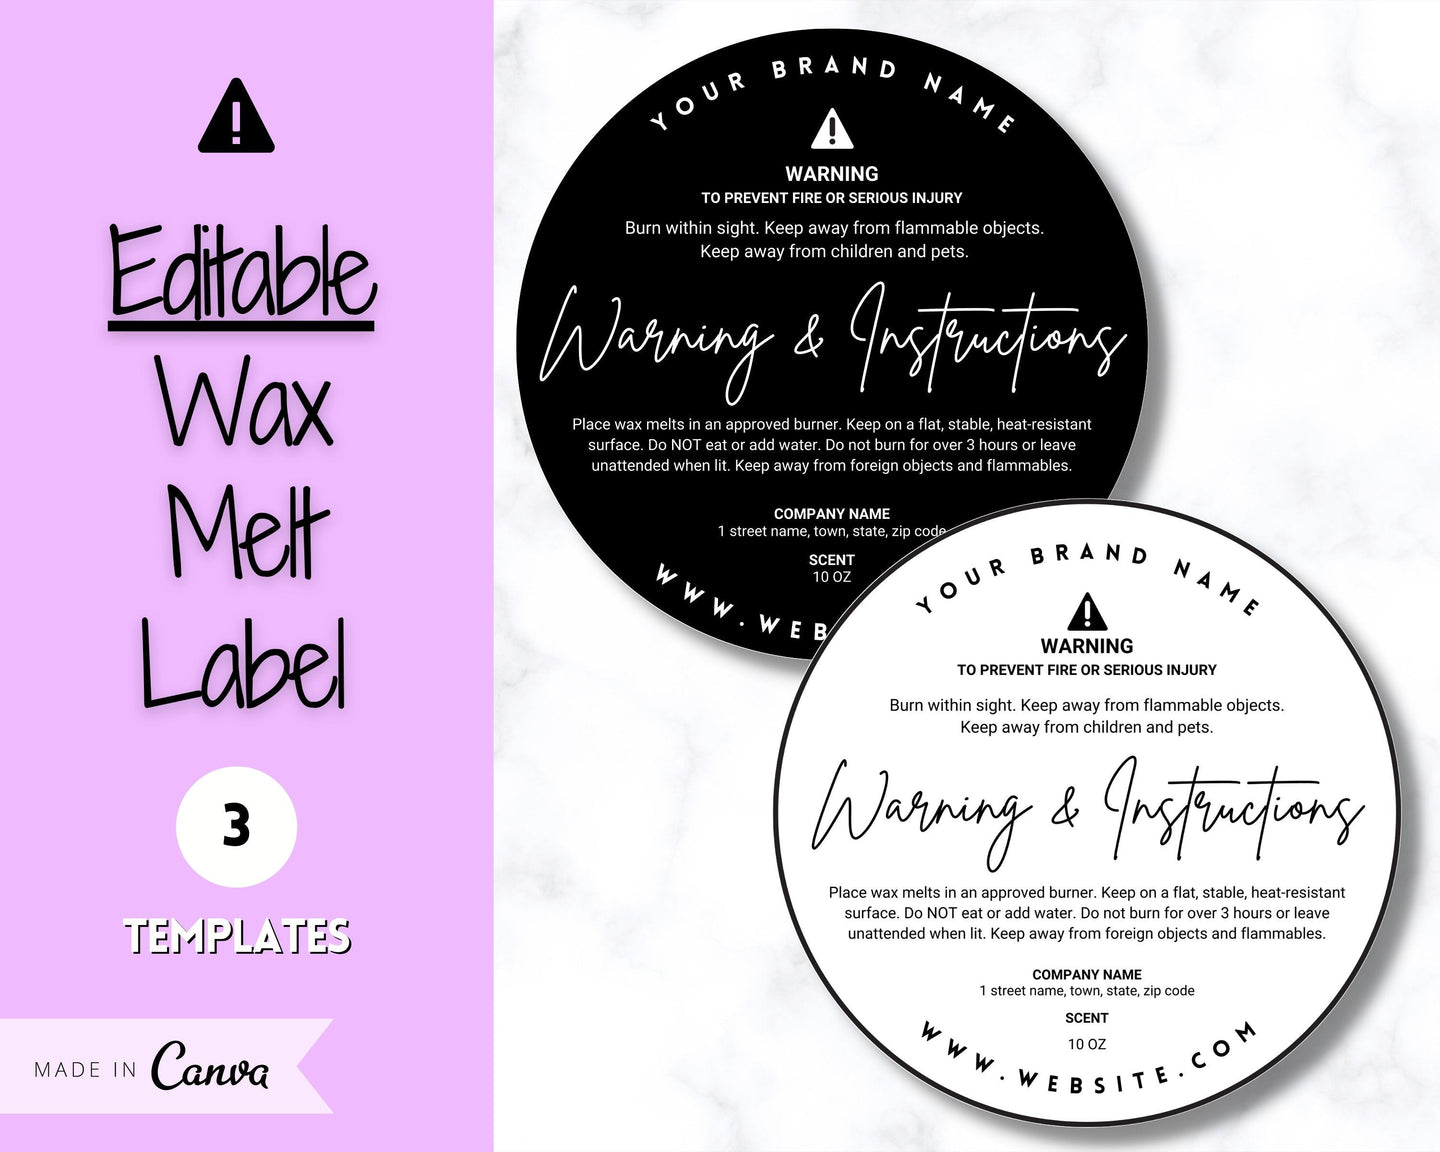 White Candle Warning and Wax Melt Safety Label Template 01 – 413